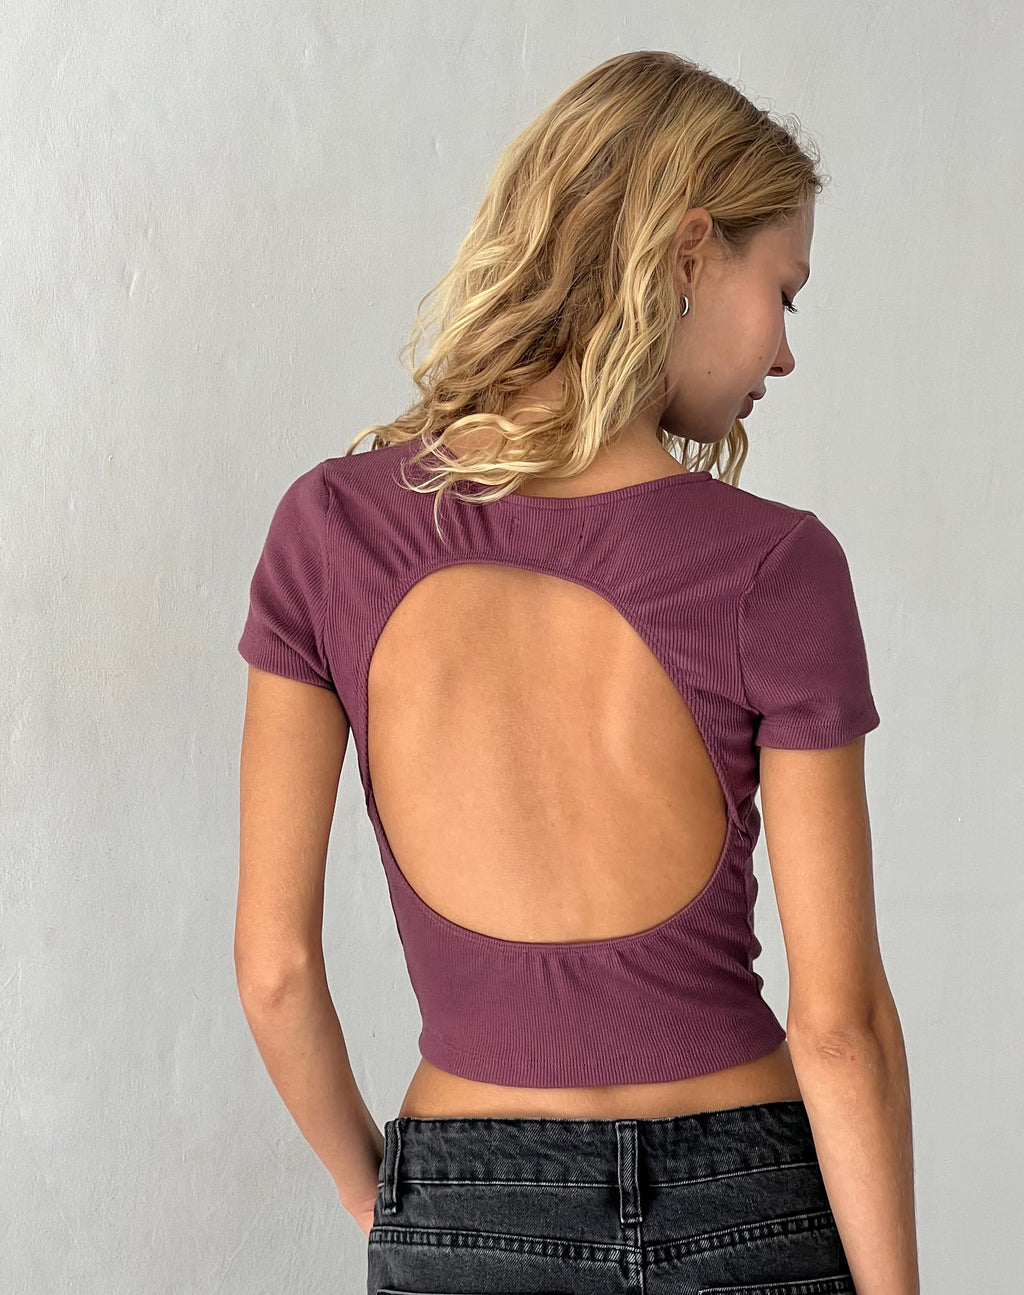 Elyto Ribbed Open Back Tee in Mauve